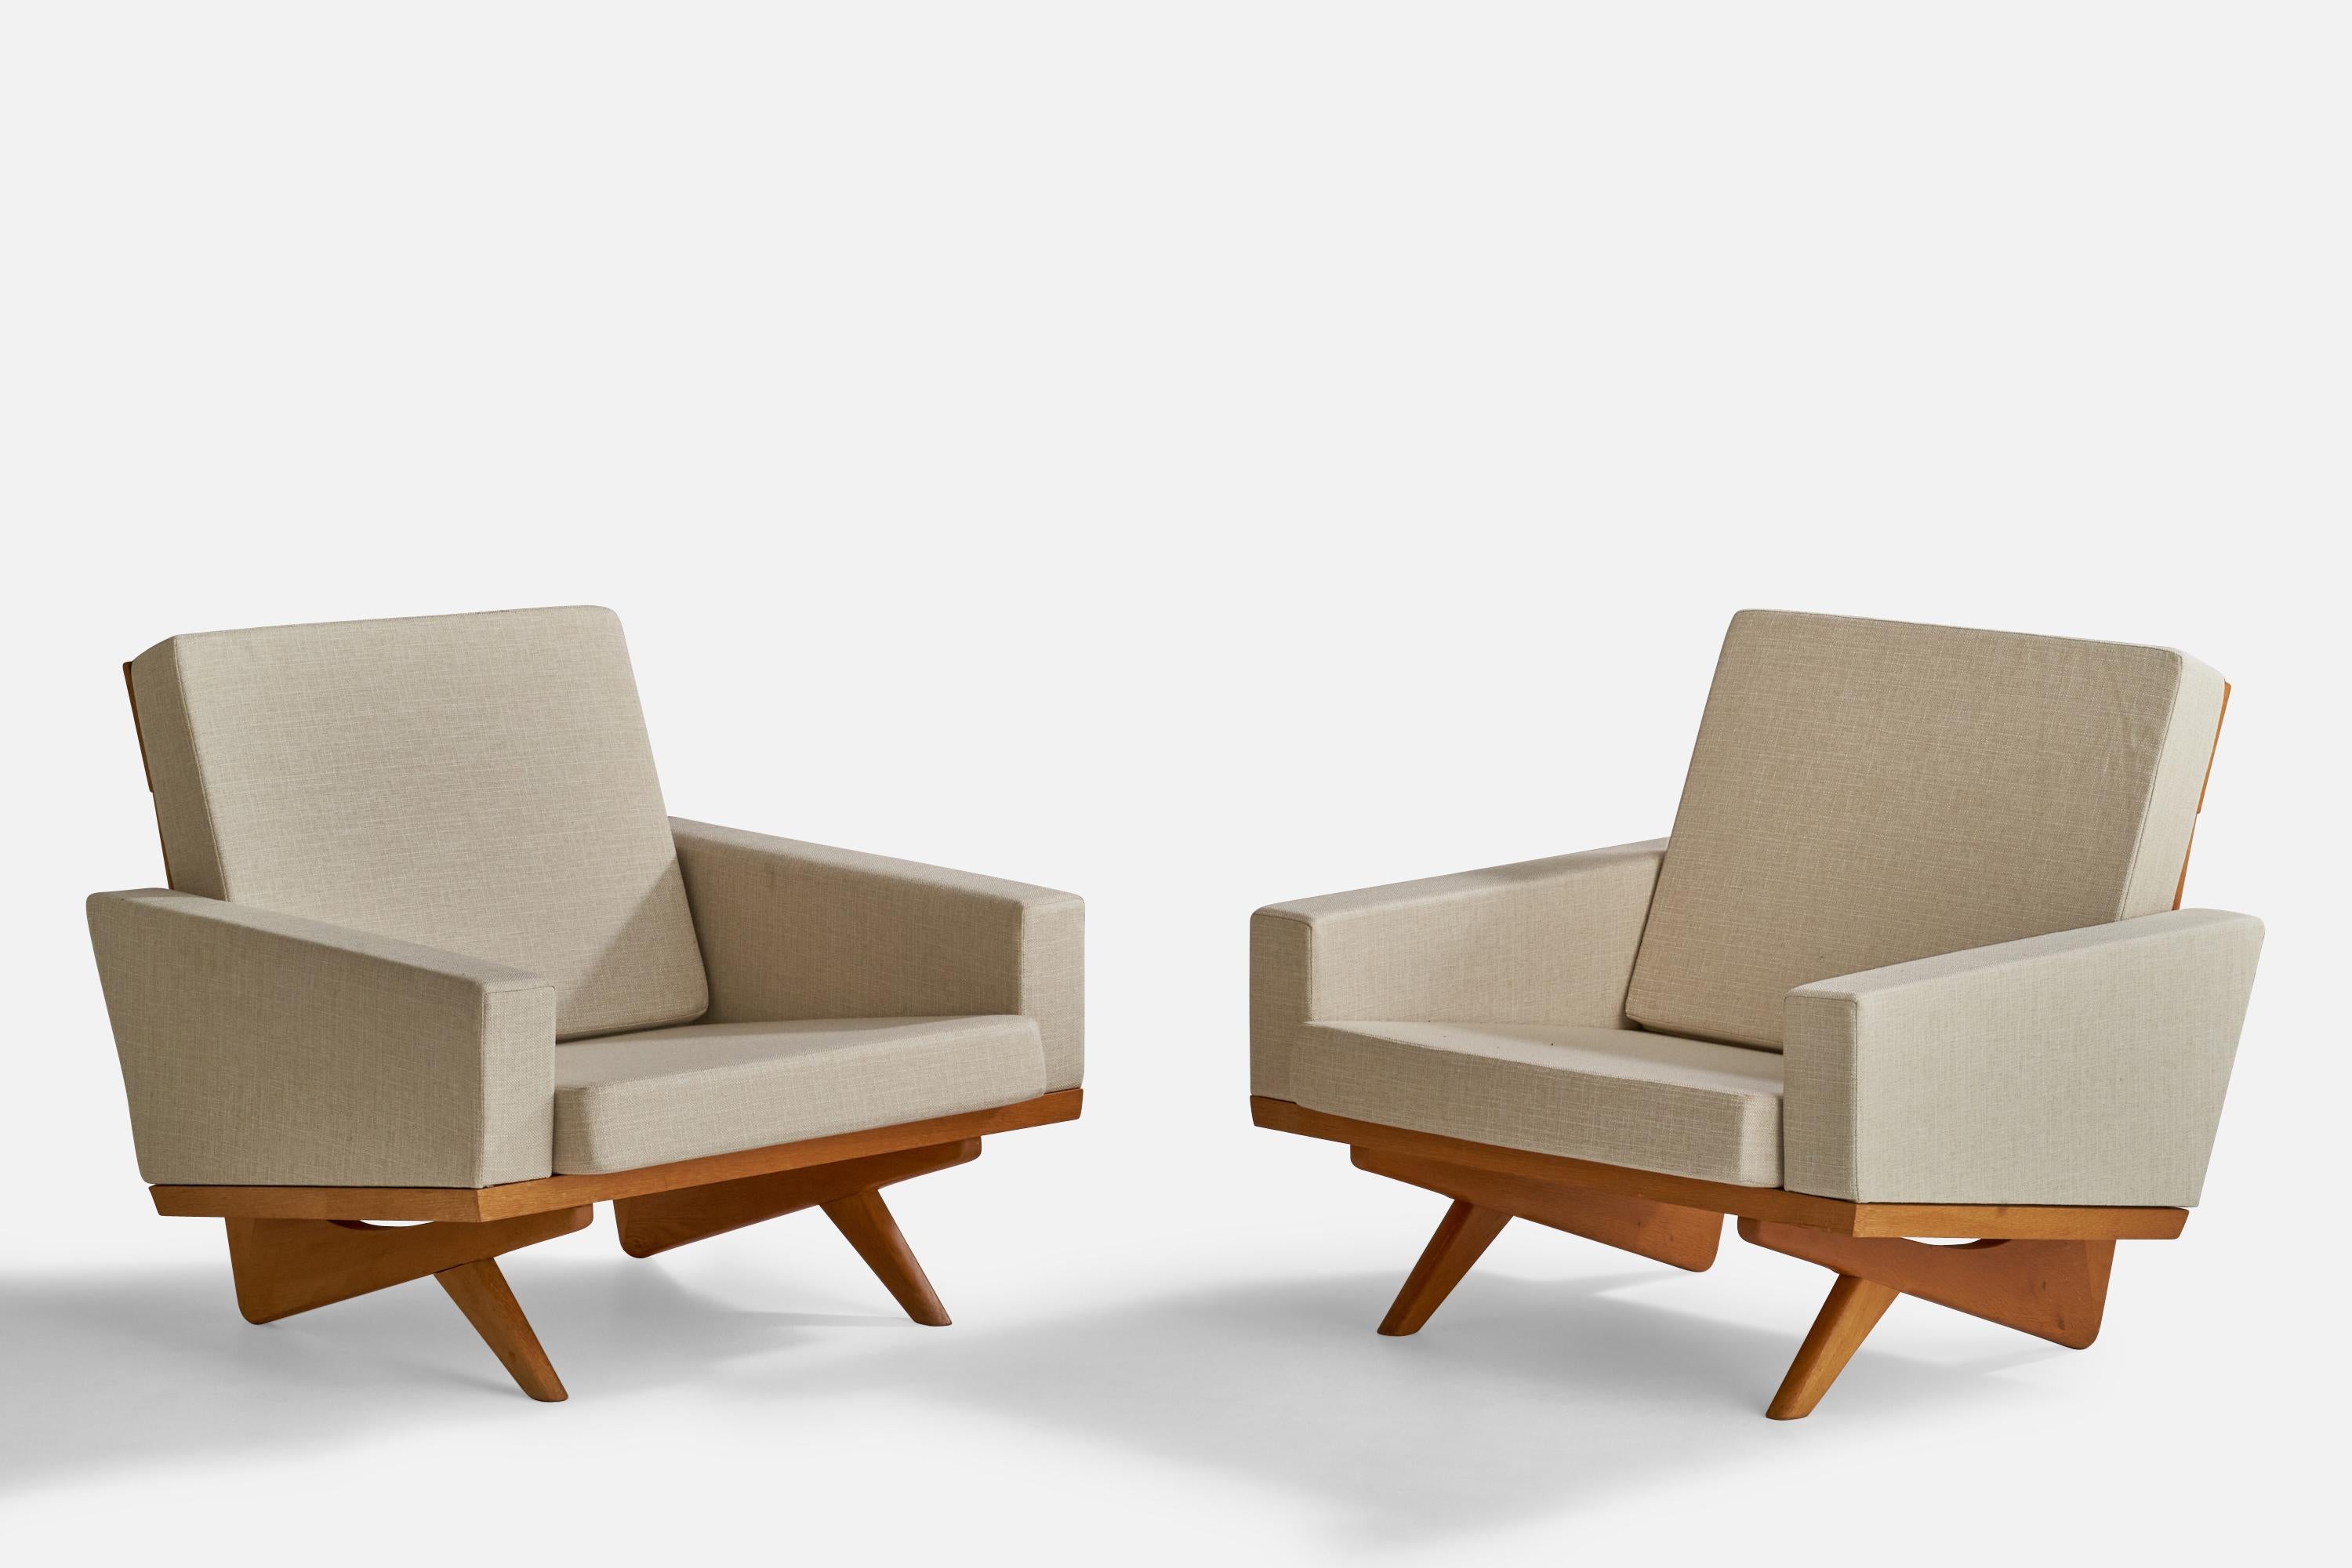 A pair of oak and white fabric lounge chairs designed by Georg Thams in 1964 and produced by Vejen Polstermøbelfabrik, Denmark, 1960s

Seat height: 13.75